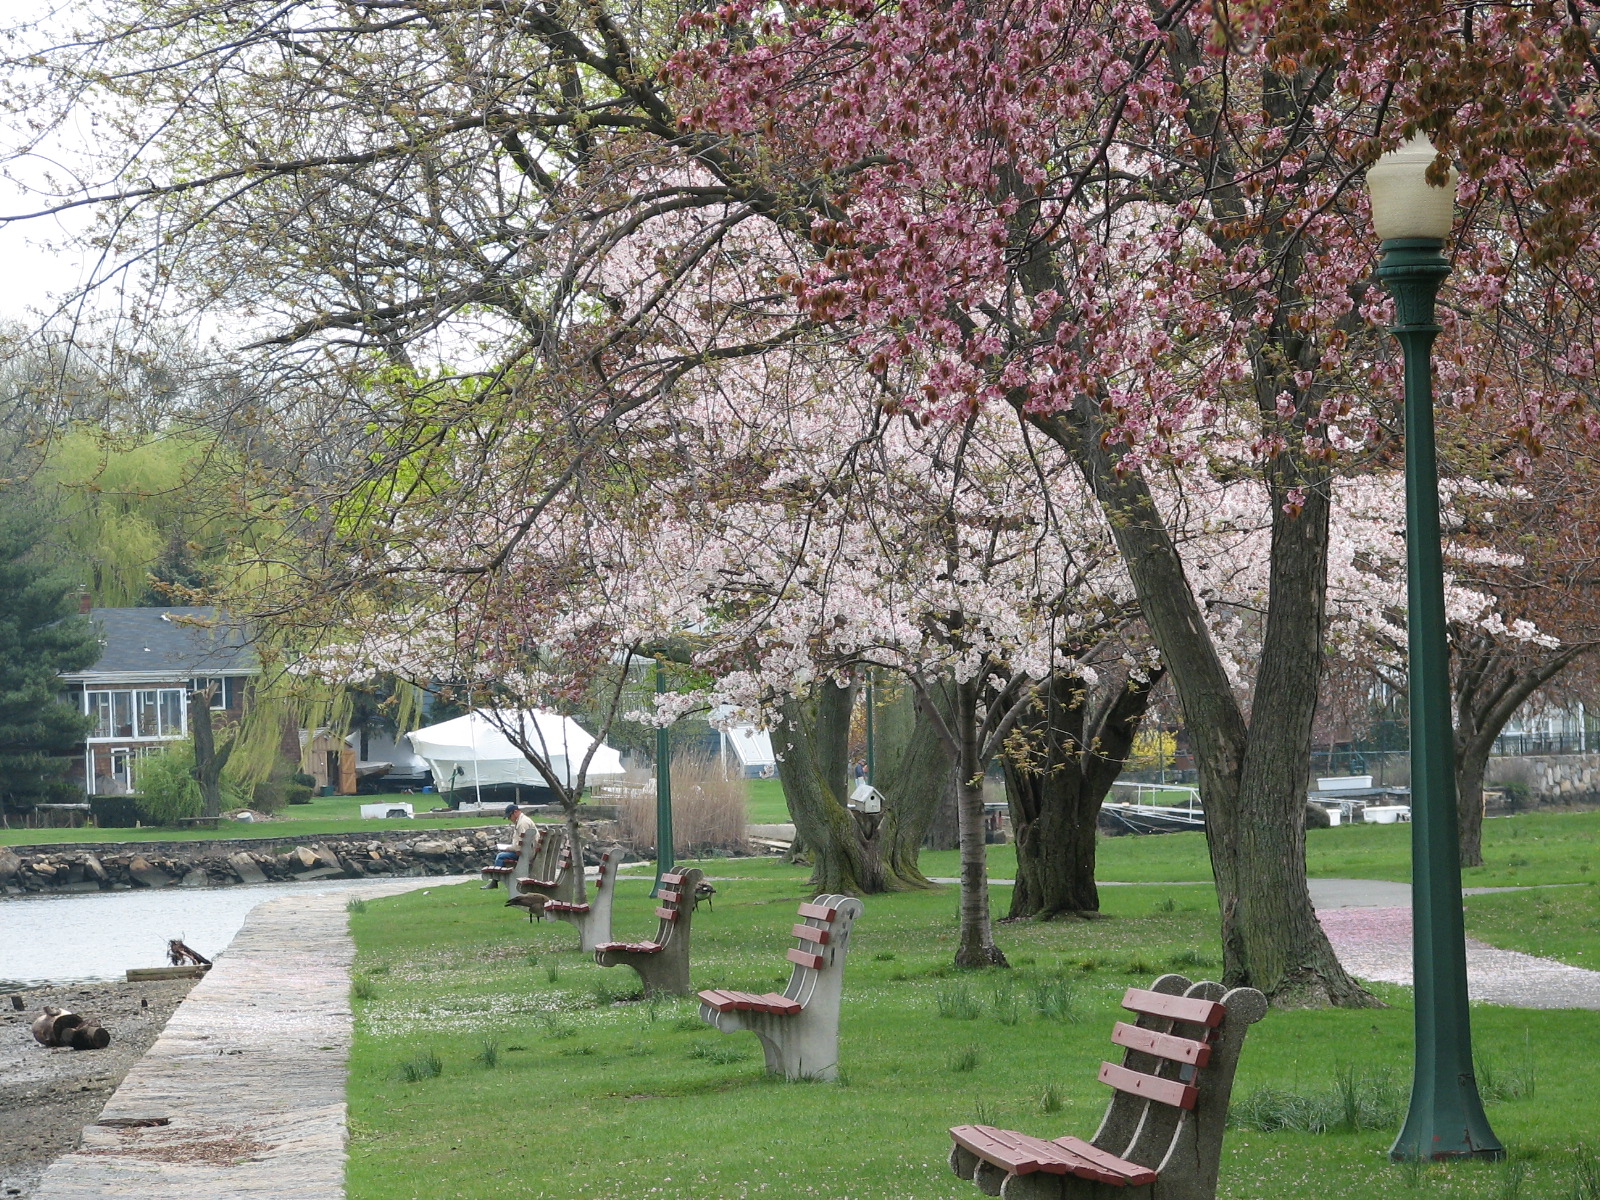 benches along a path surrounded by flowering trees